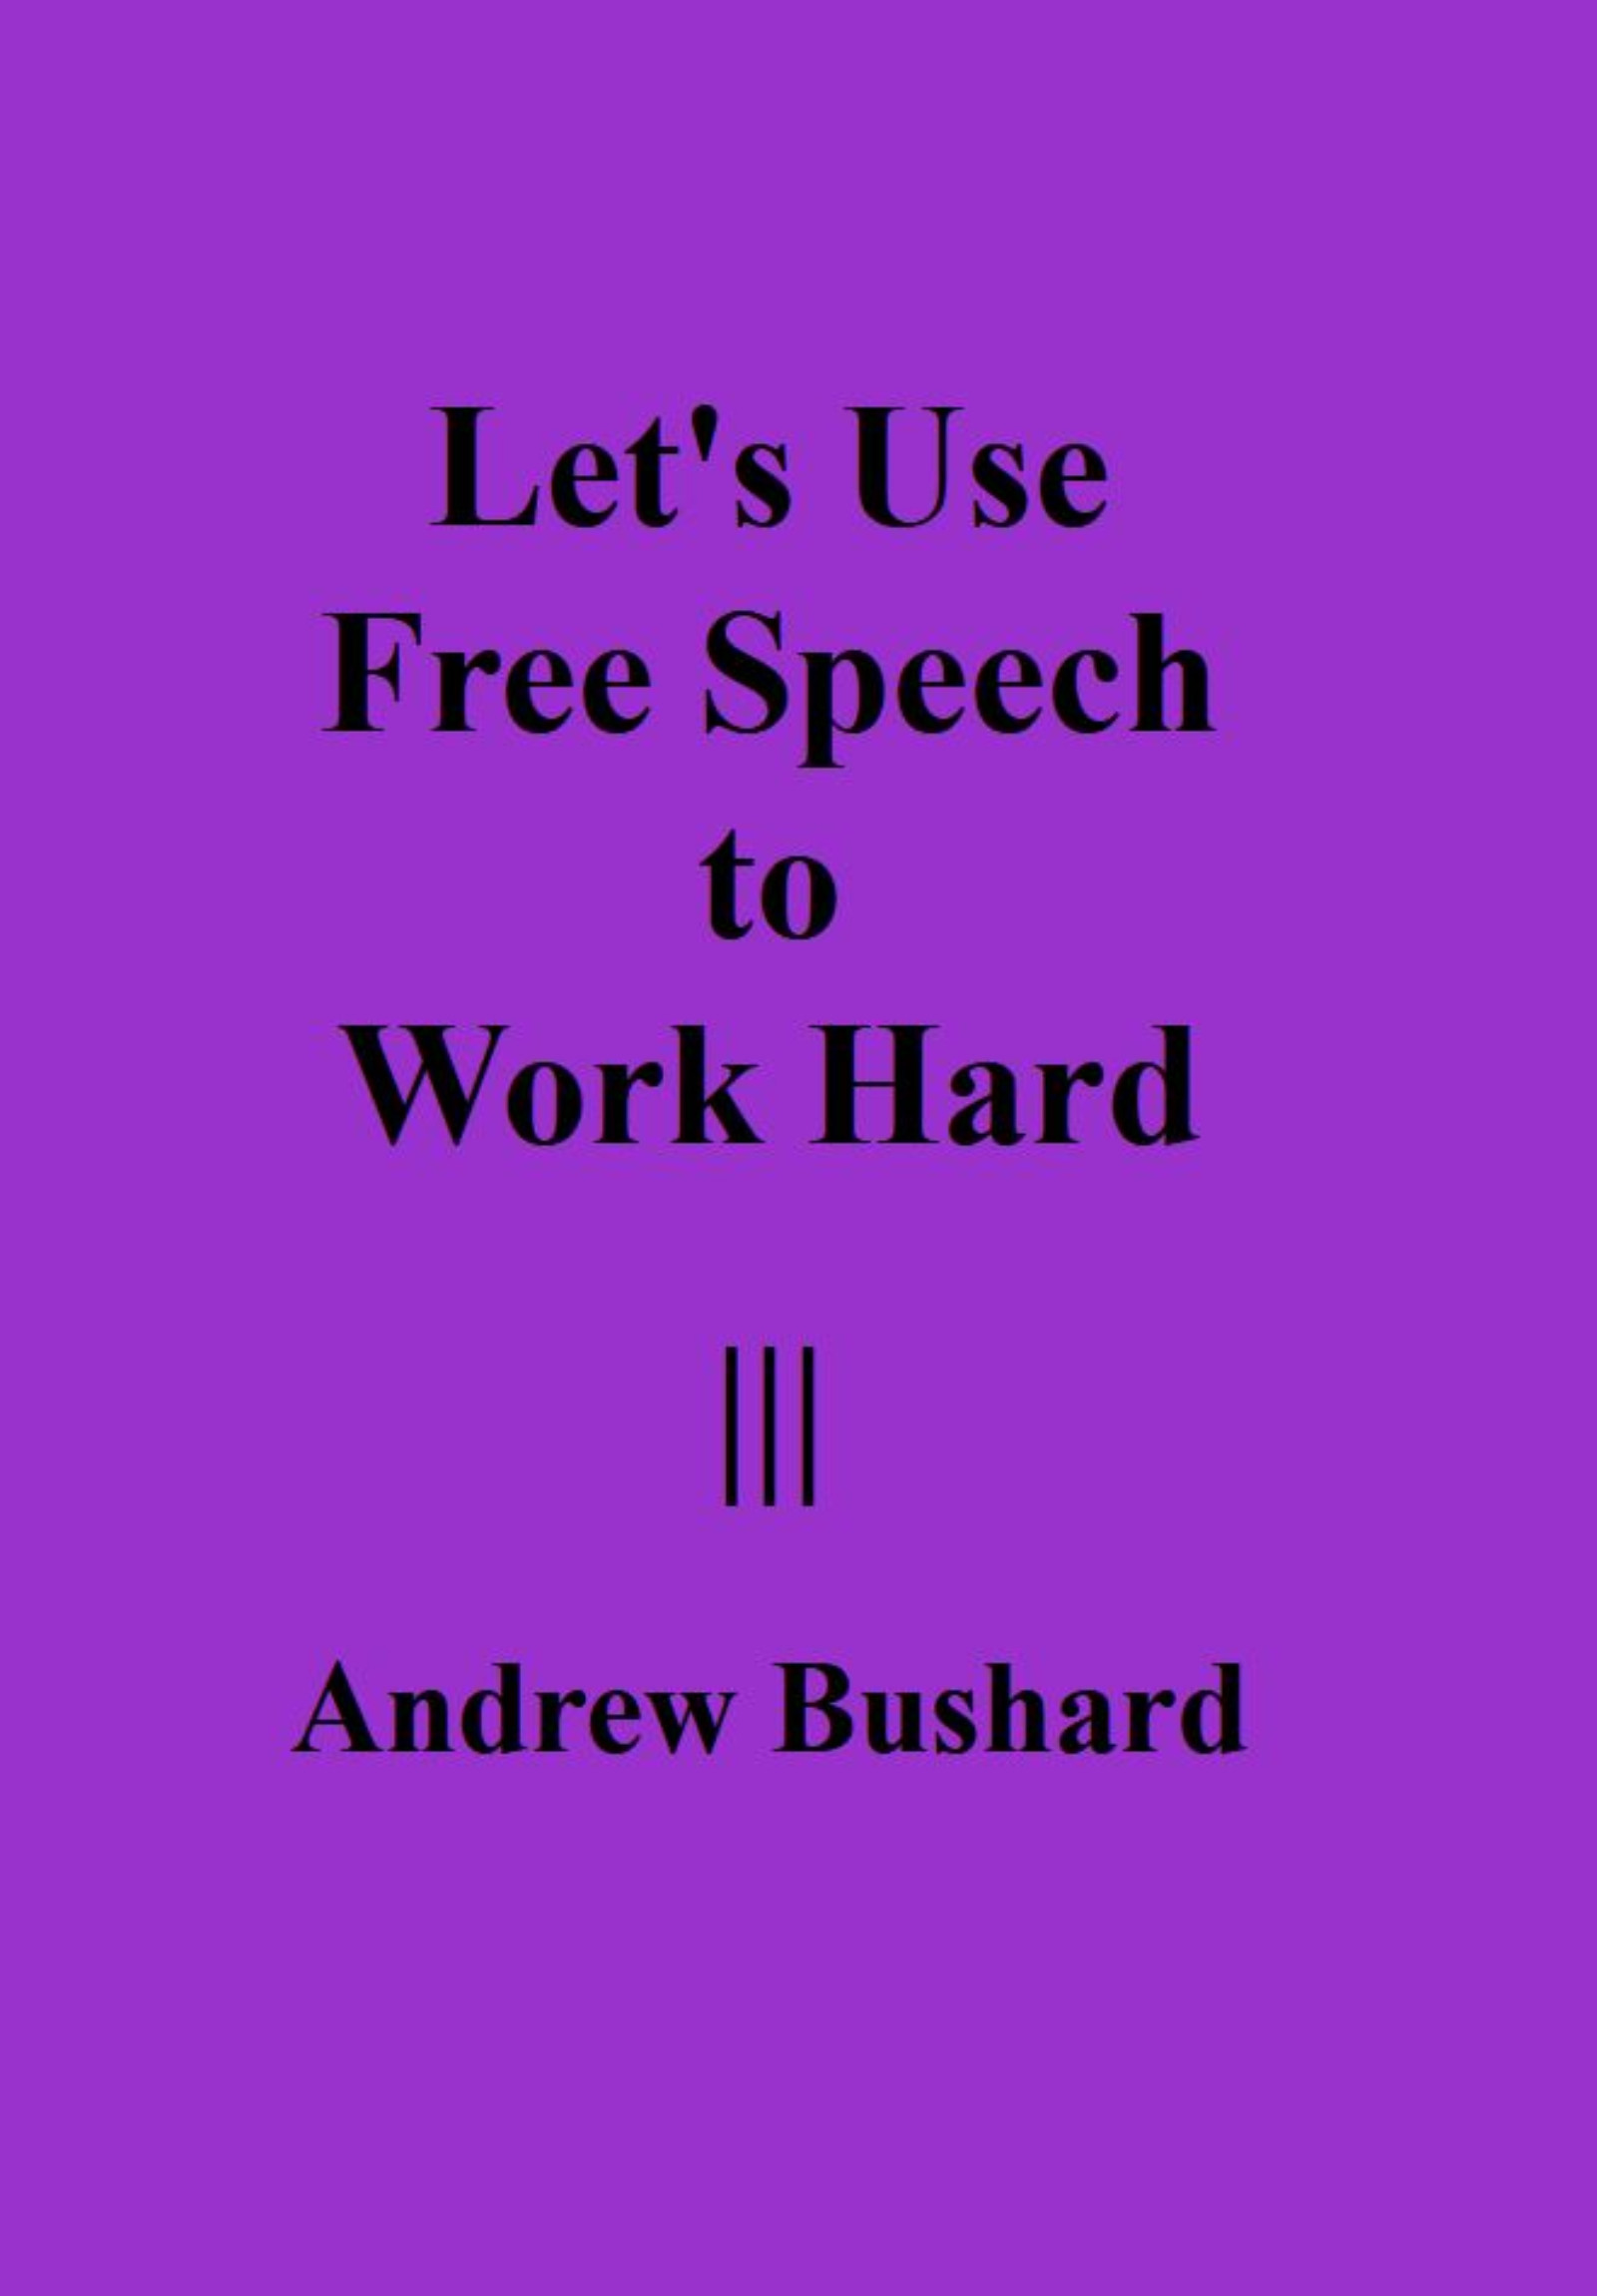 Let's Use Free Speech to Work Hard's featured image